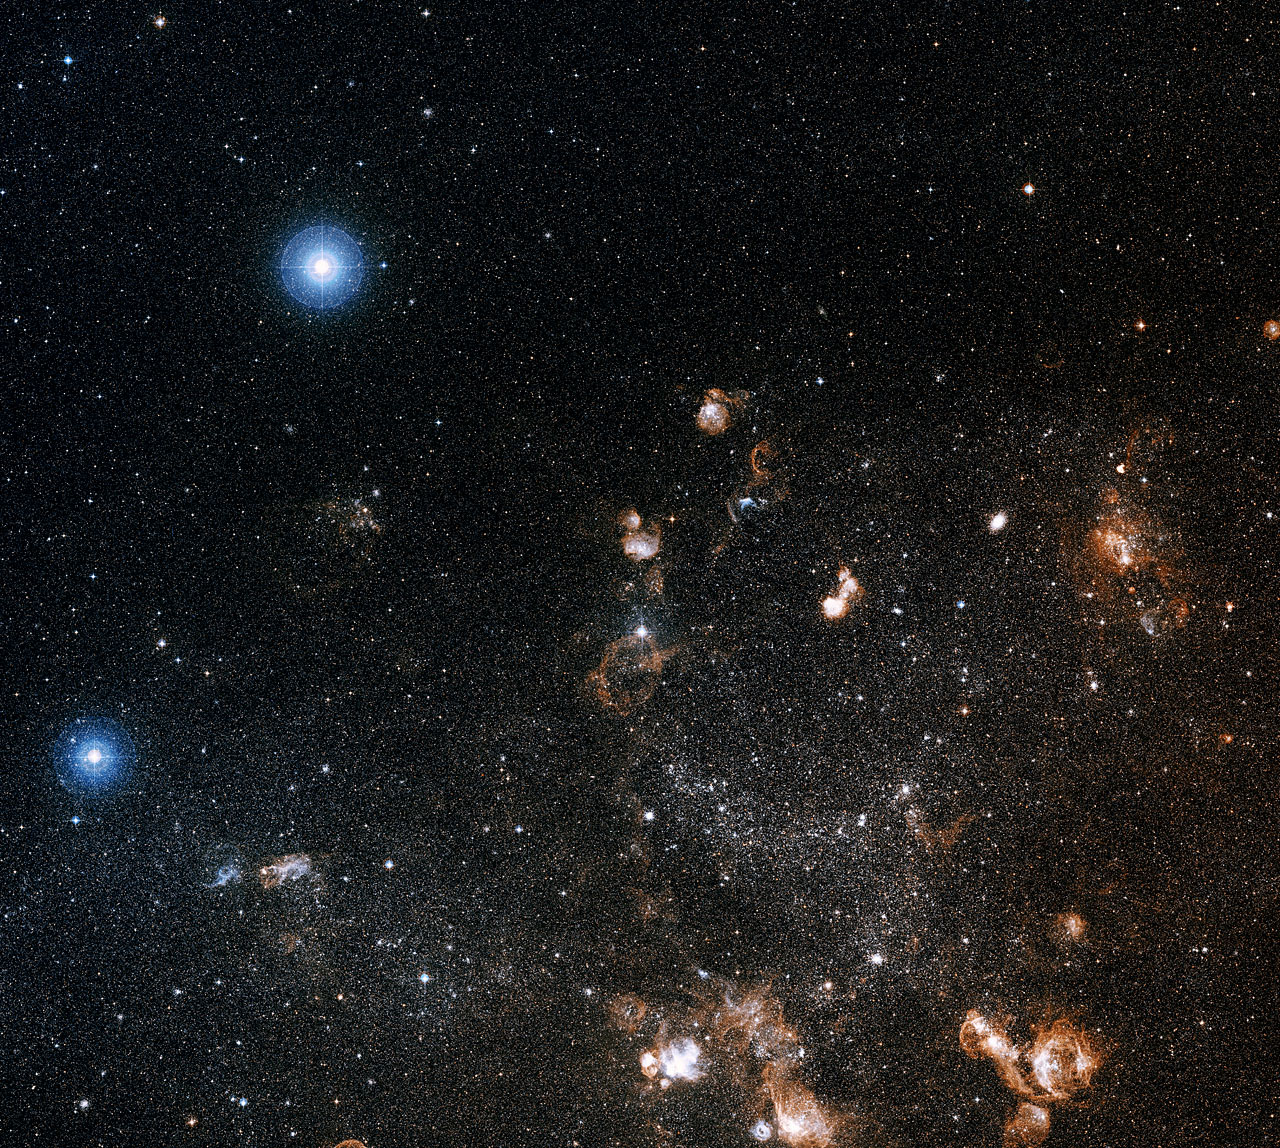 Large and small stars in harmonious coexistence | ESA/Hubble